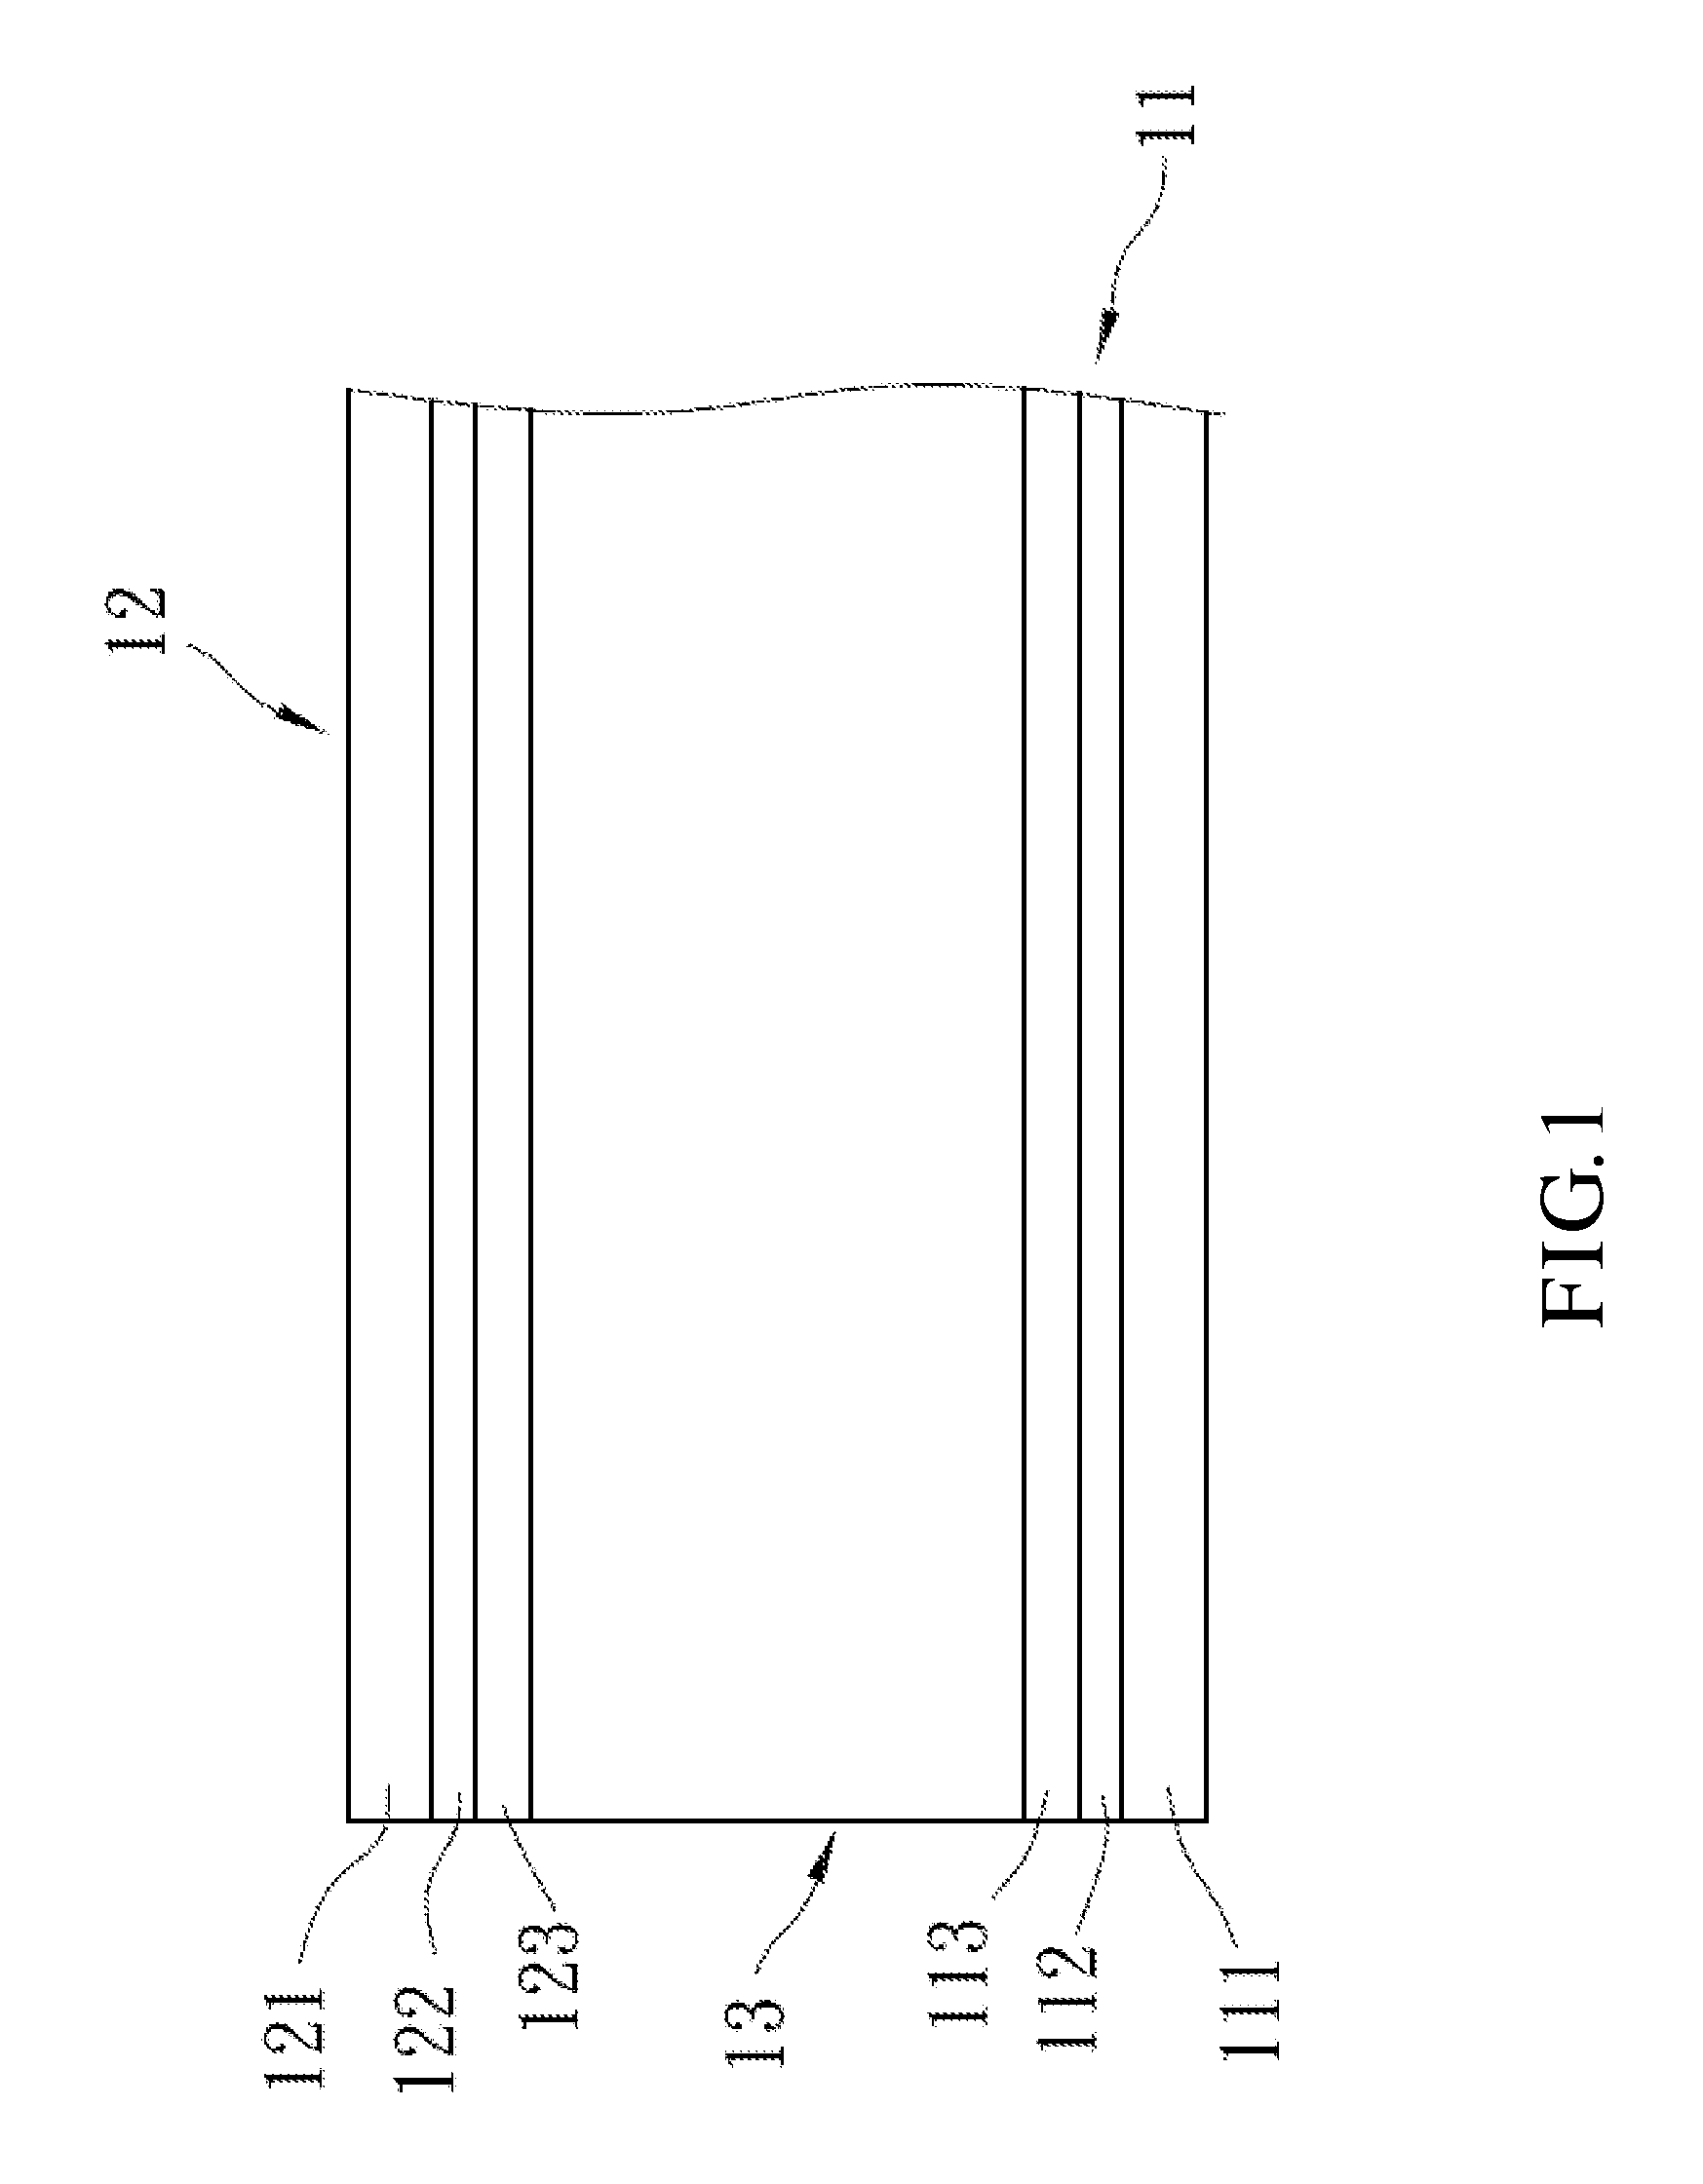 Liquid crystal alignment agent and uses thereof